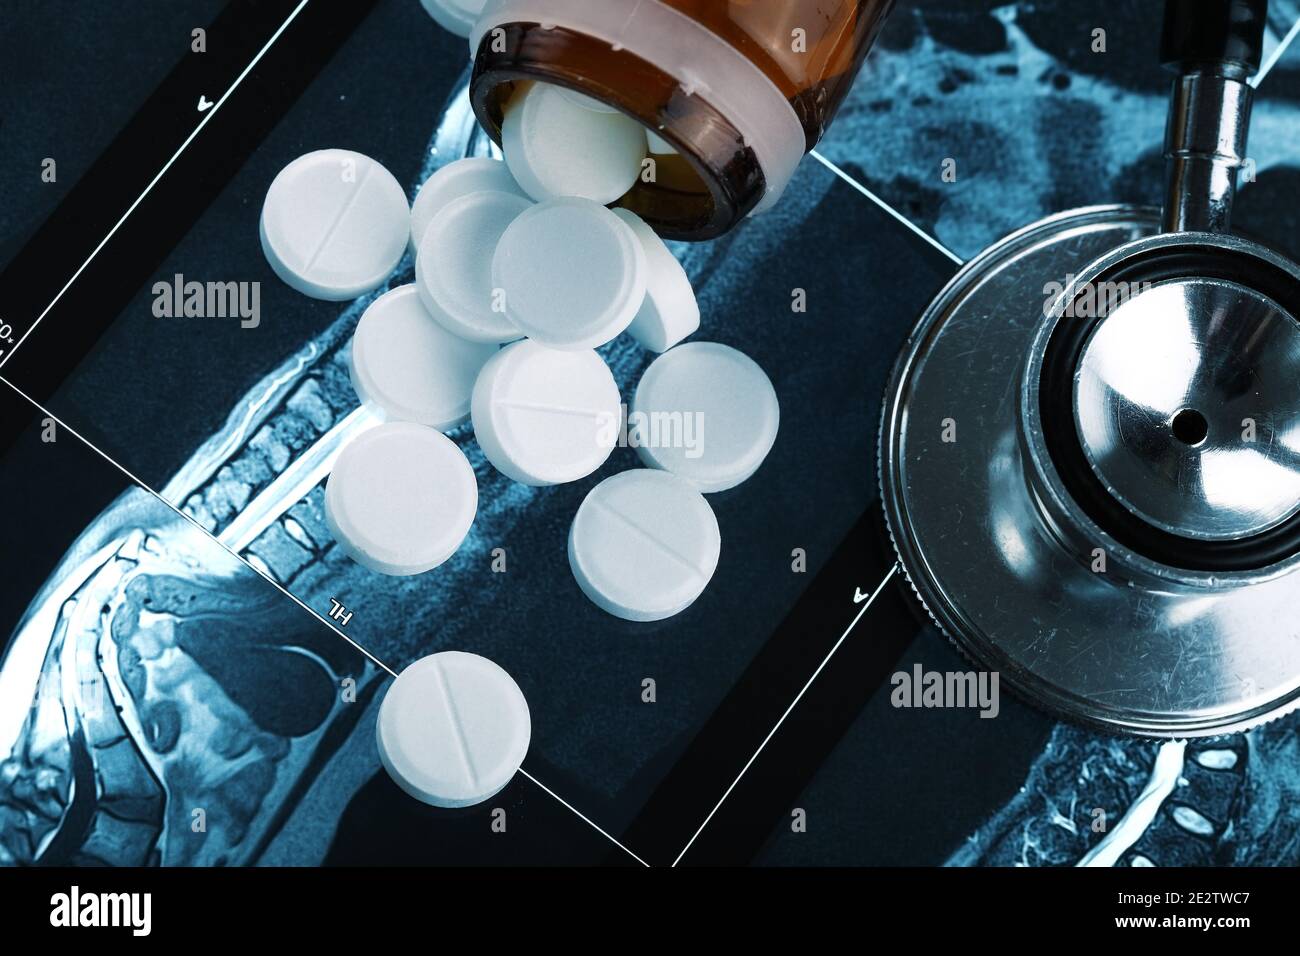 Handful of white round pills on a st-scan Stock Photo